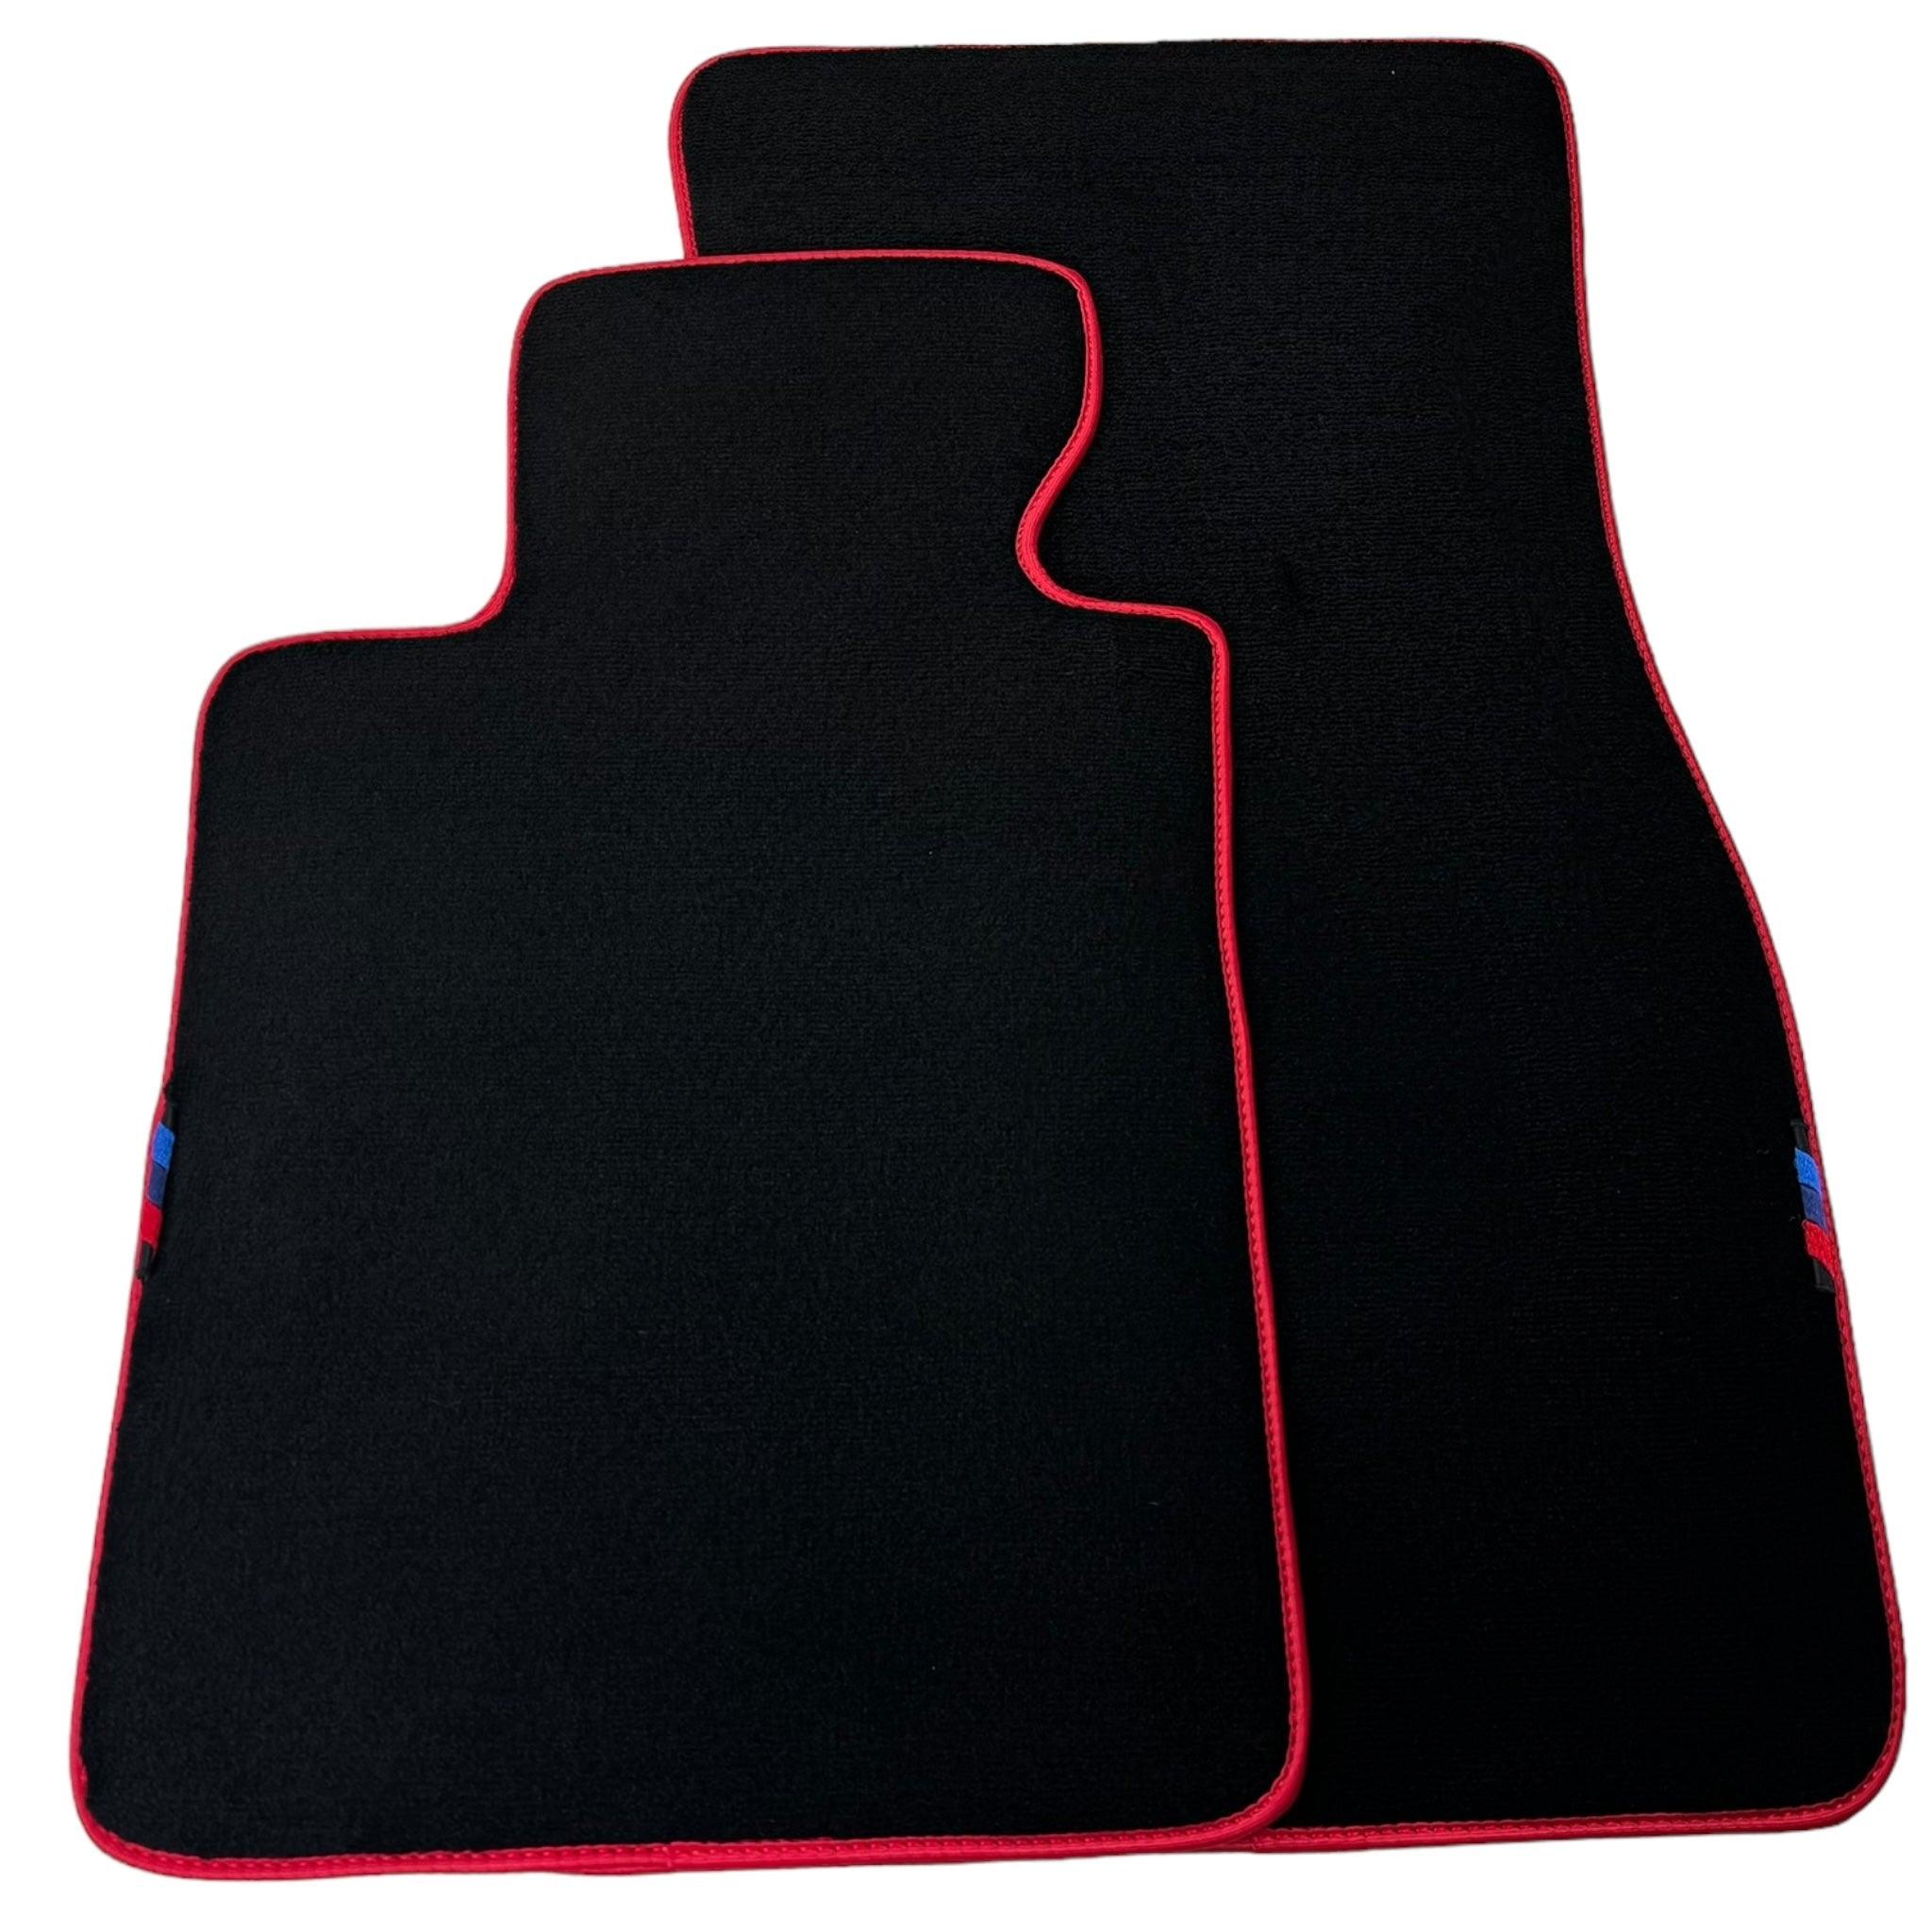 Black Floor Mats For BMW 4 Series G26 Gran Coupe | Red Trim